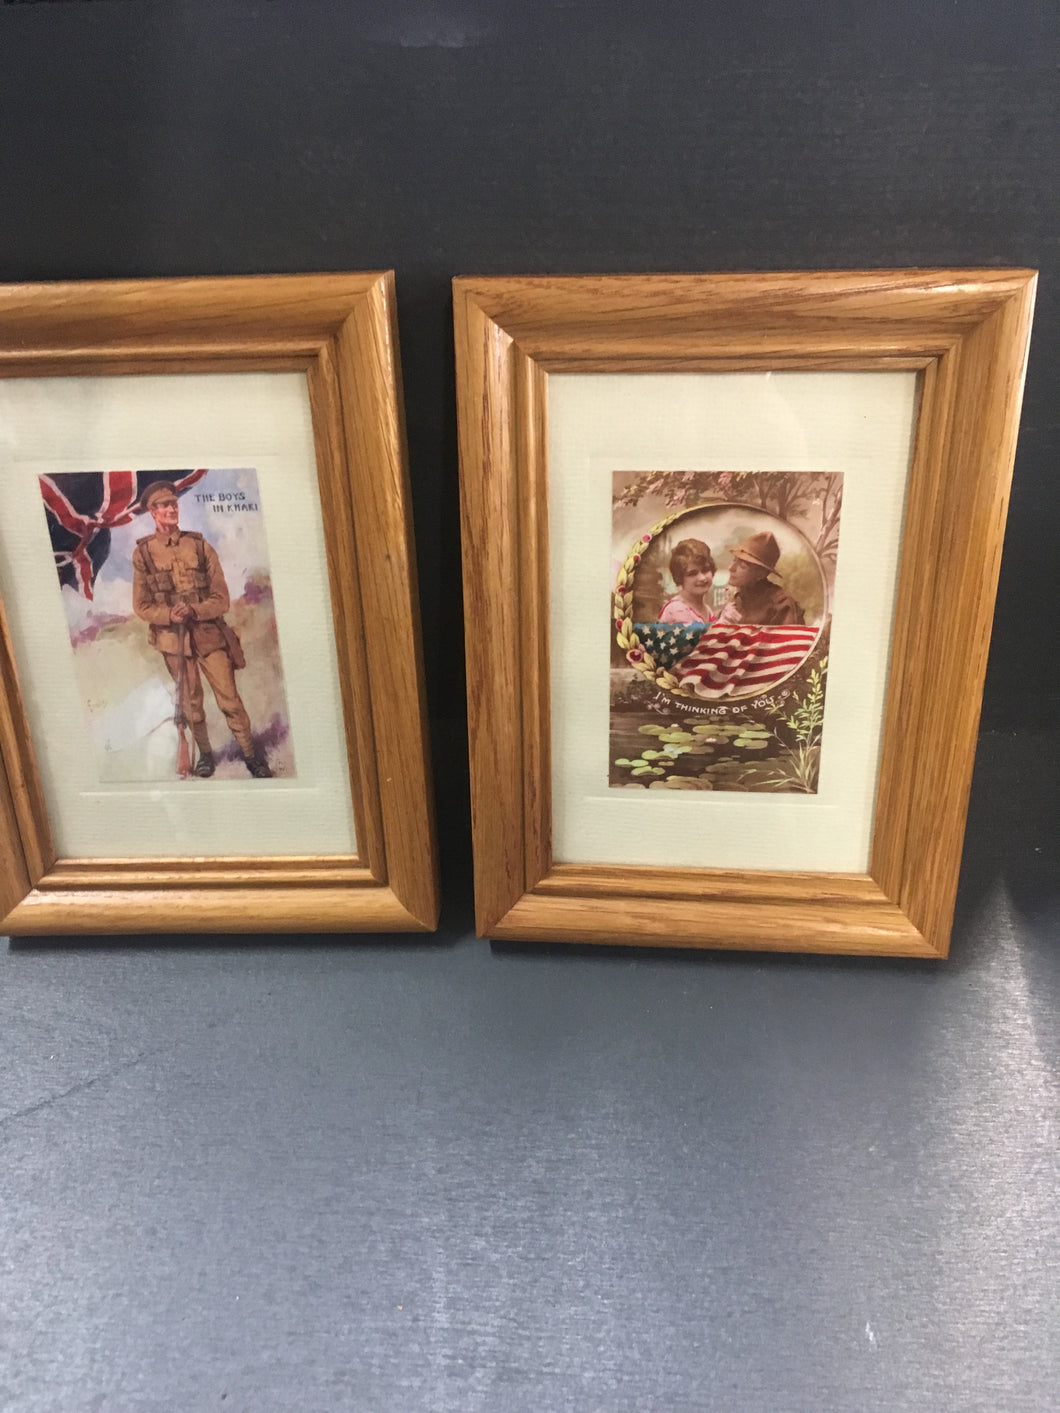 Unique WW 1 Themed Prints in Matching Frames~5 1/2